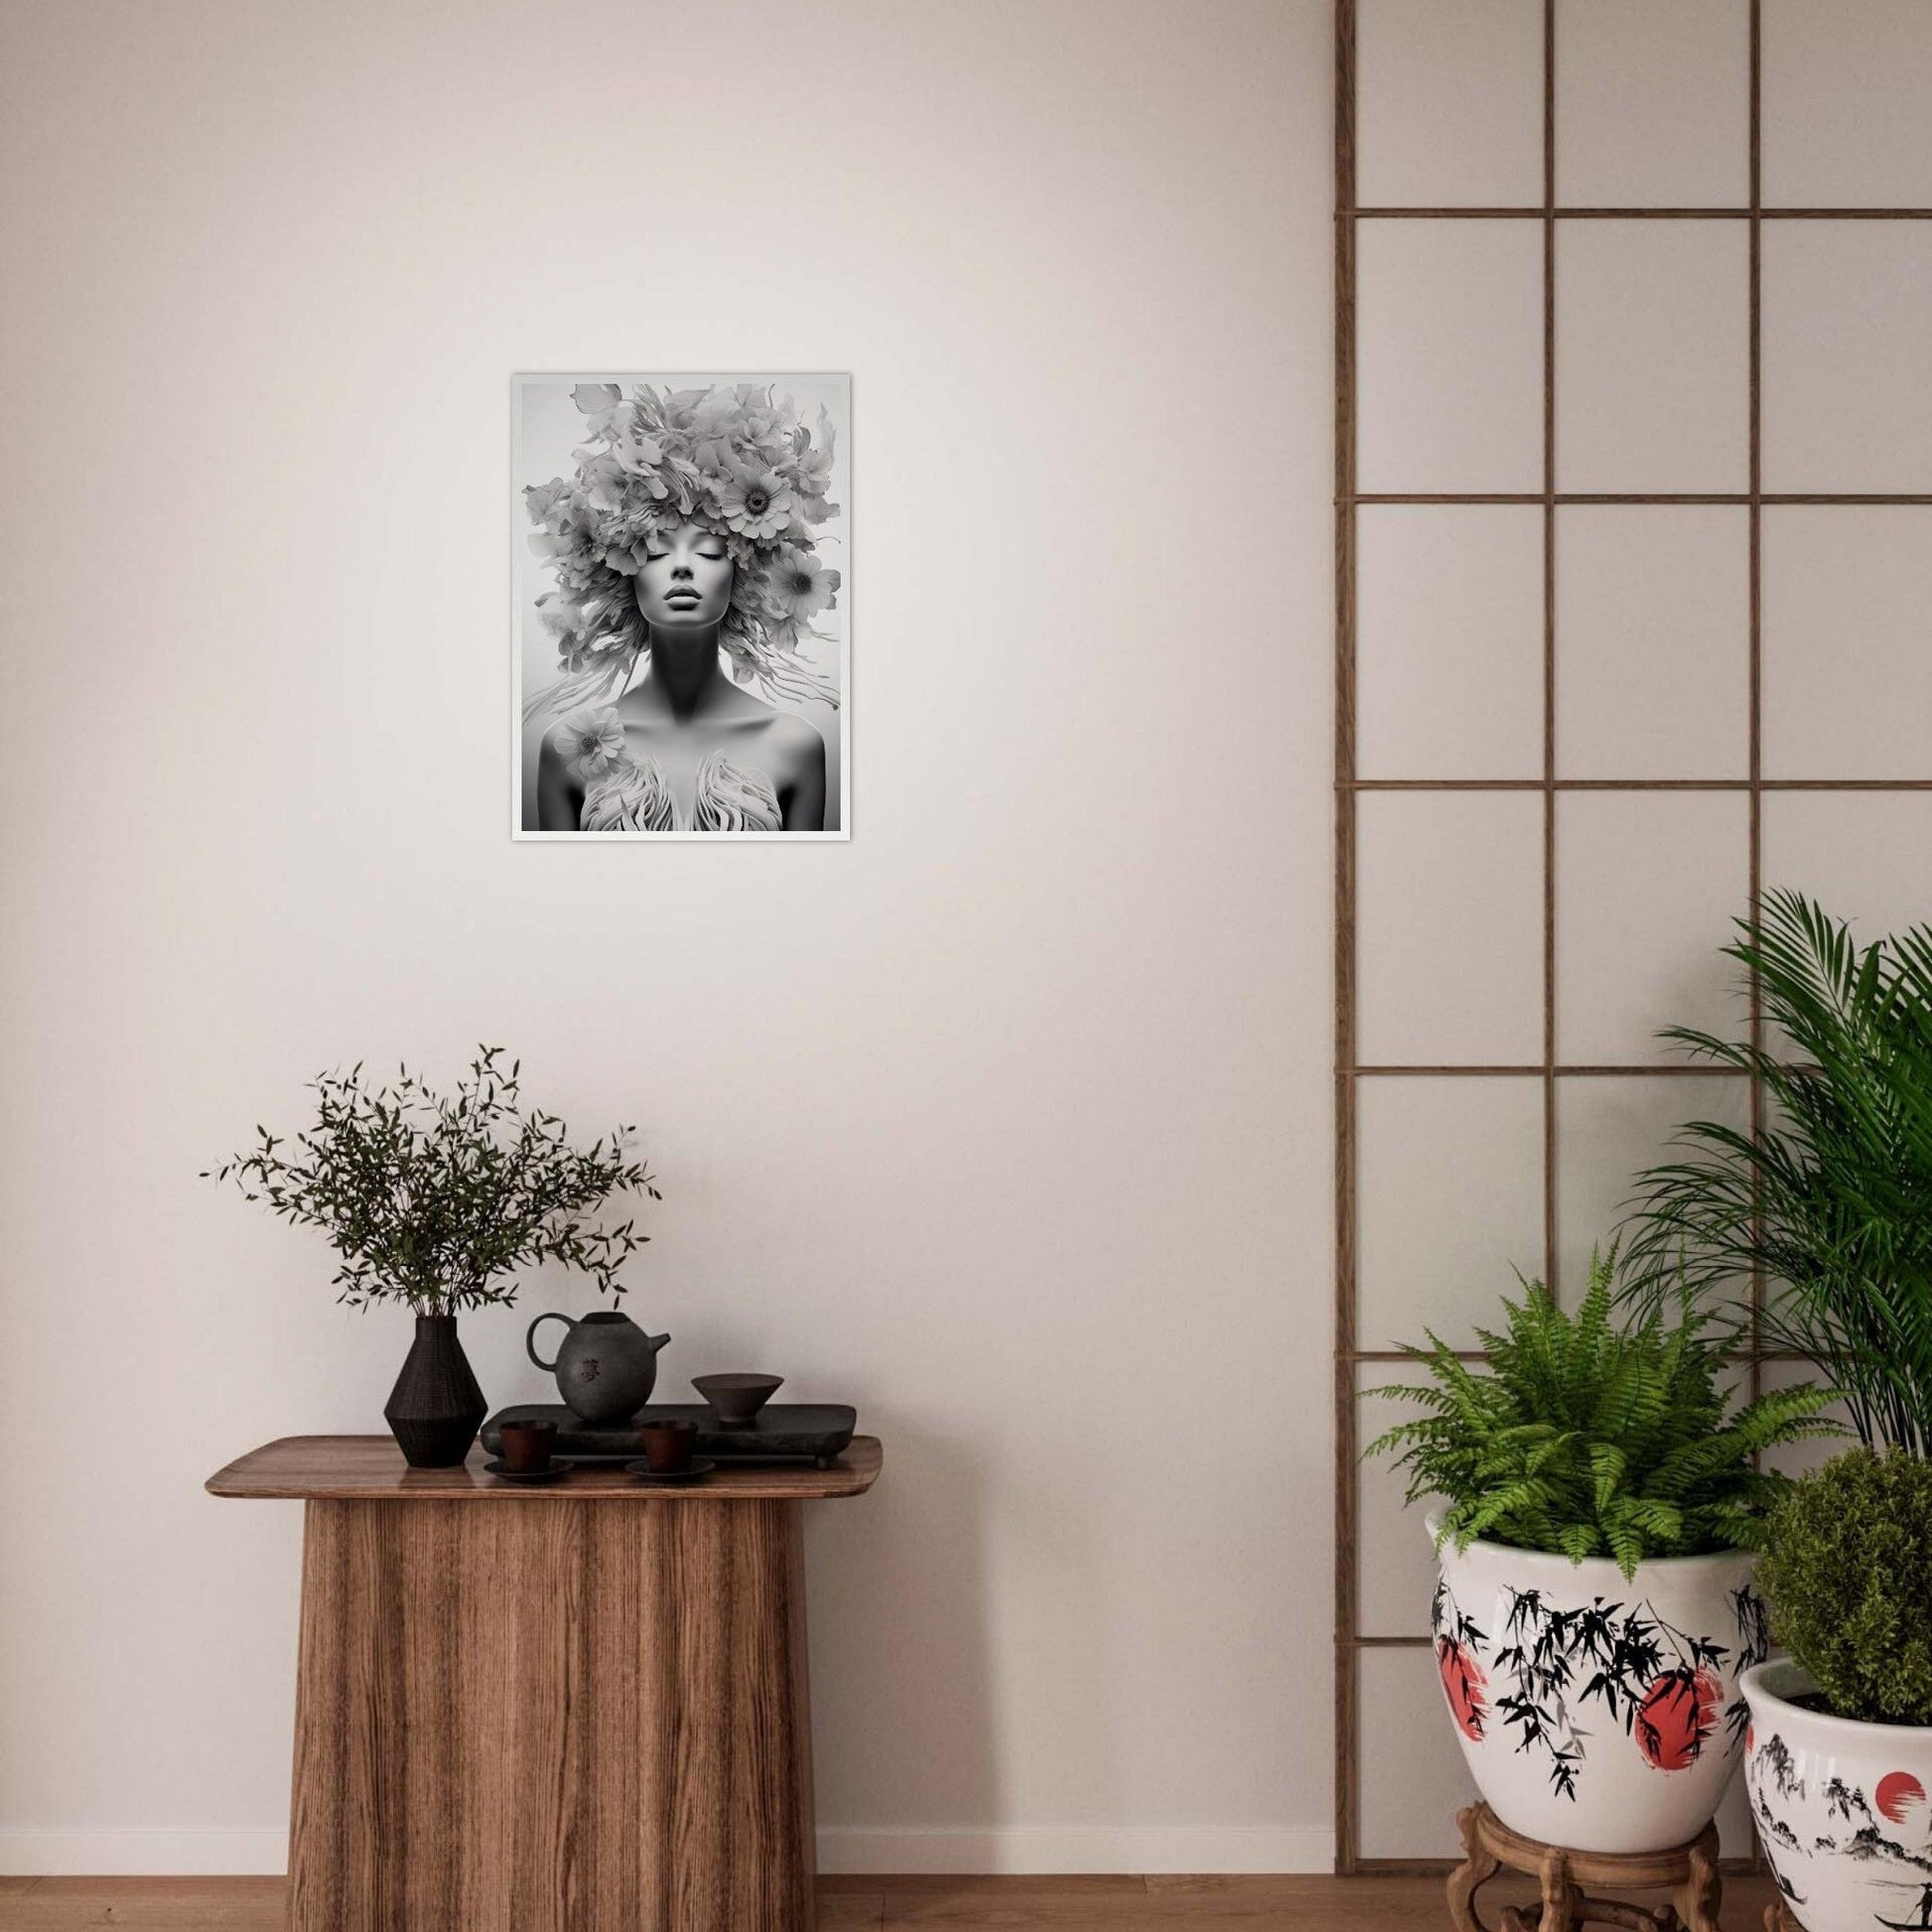 A black and white image of a woman with flowers on her head, perfect for transforming your space and available as a Thinking Of You The Oracle Windows™ Collection poster.